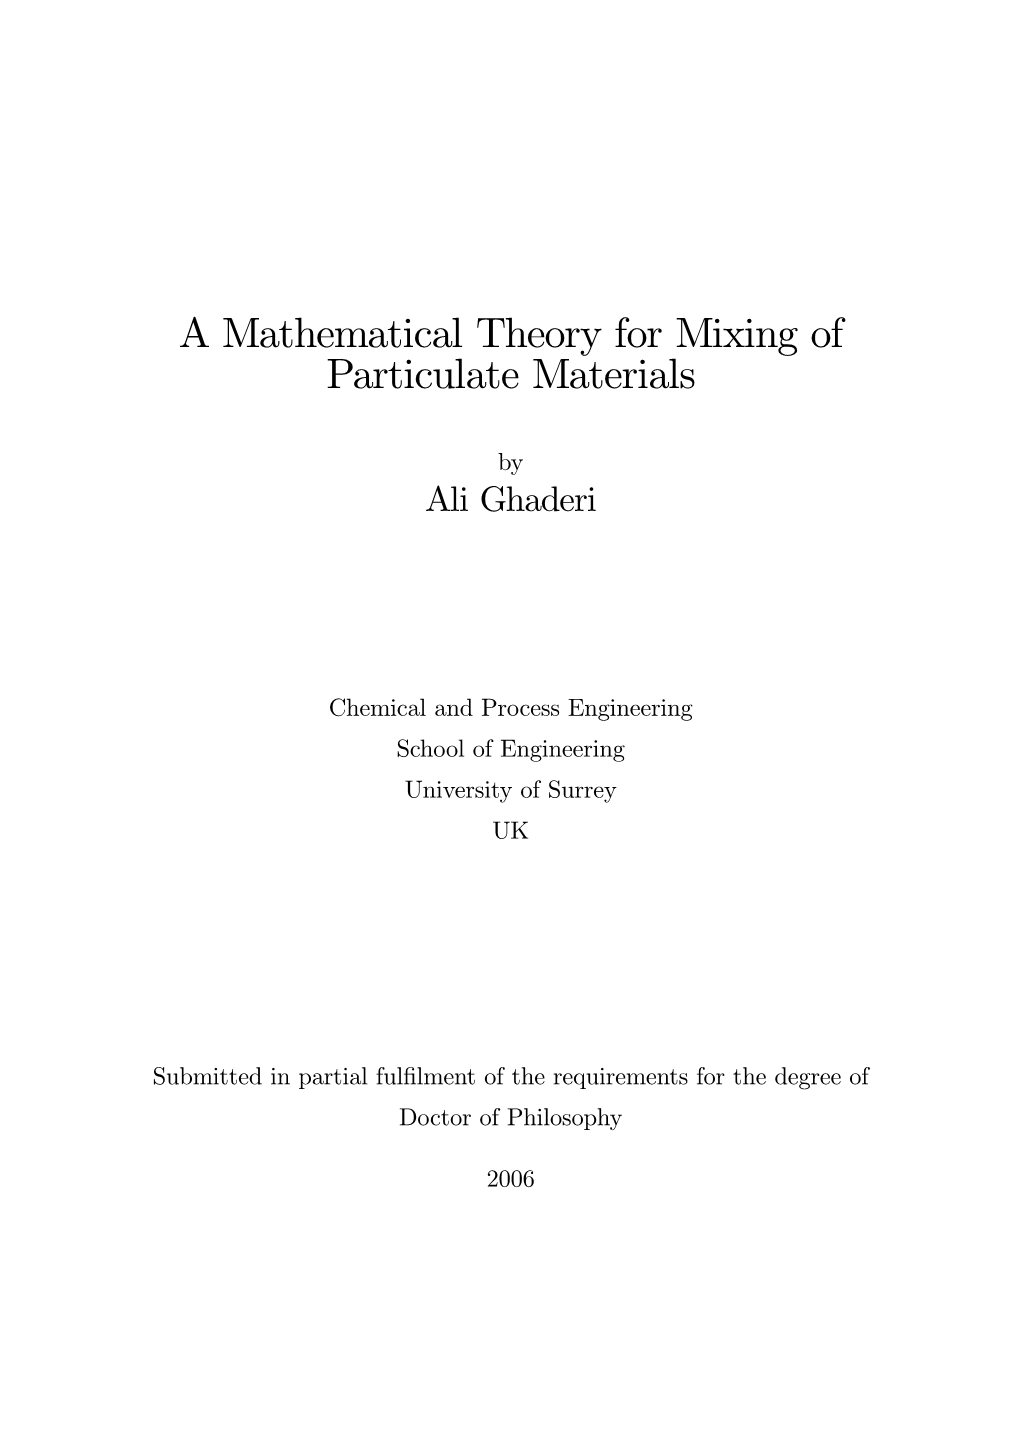 A Mathematical Theory for Mixing of Particulate Materials